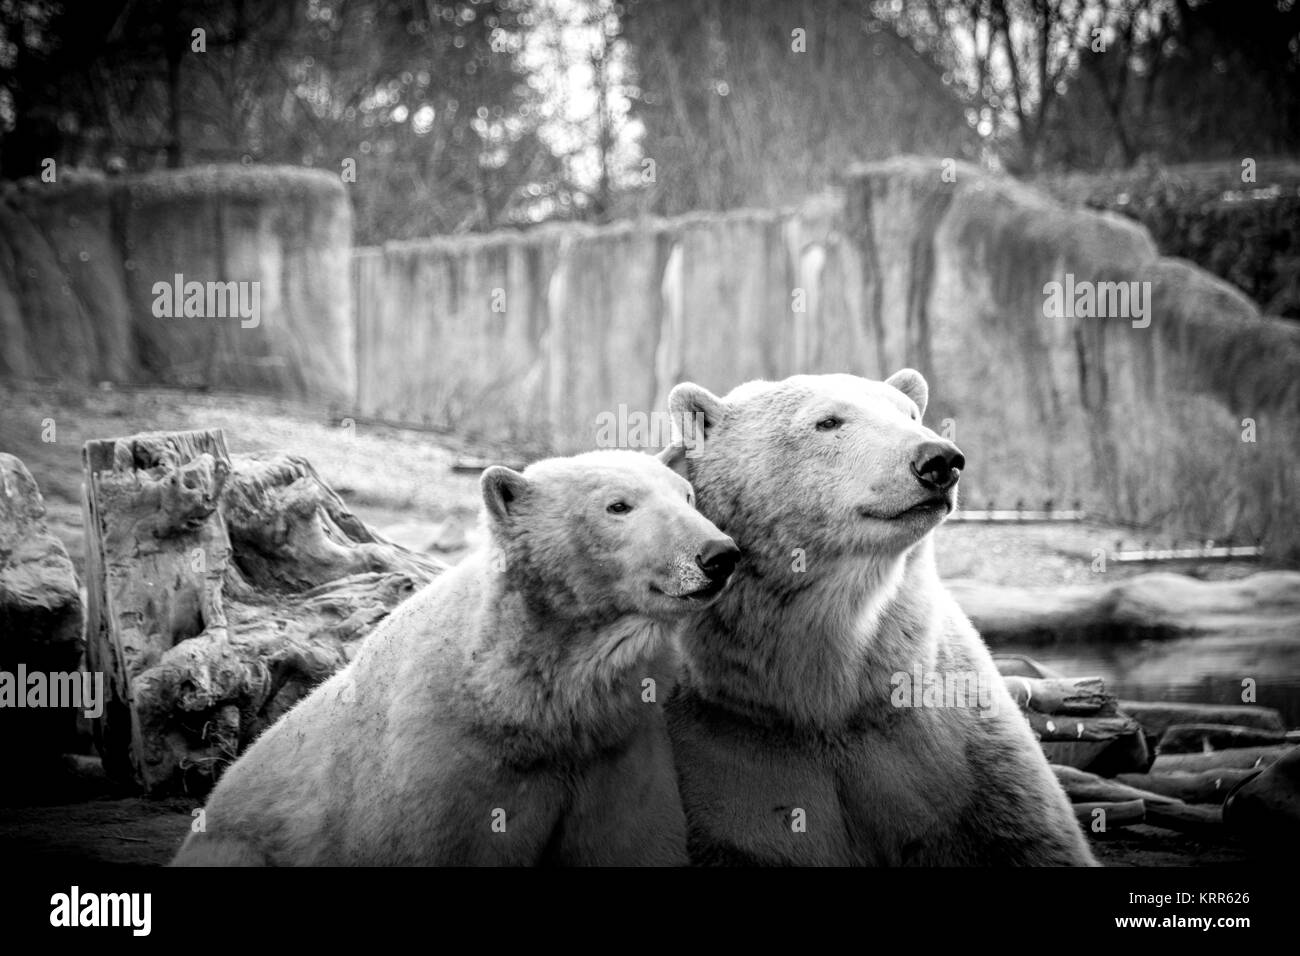 Bear buddies. Two bears posing for a photograph Stock Photo